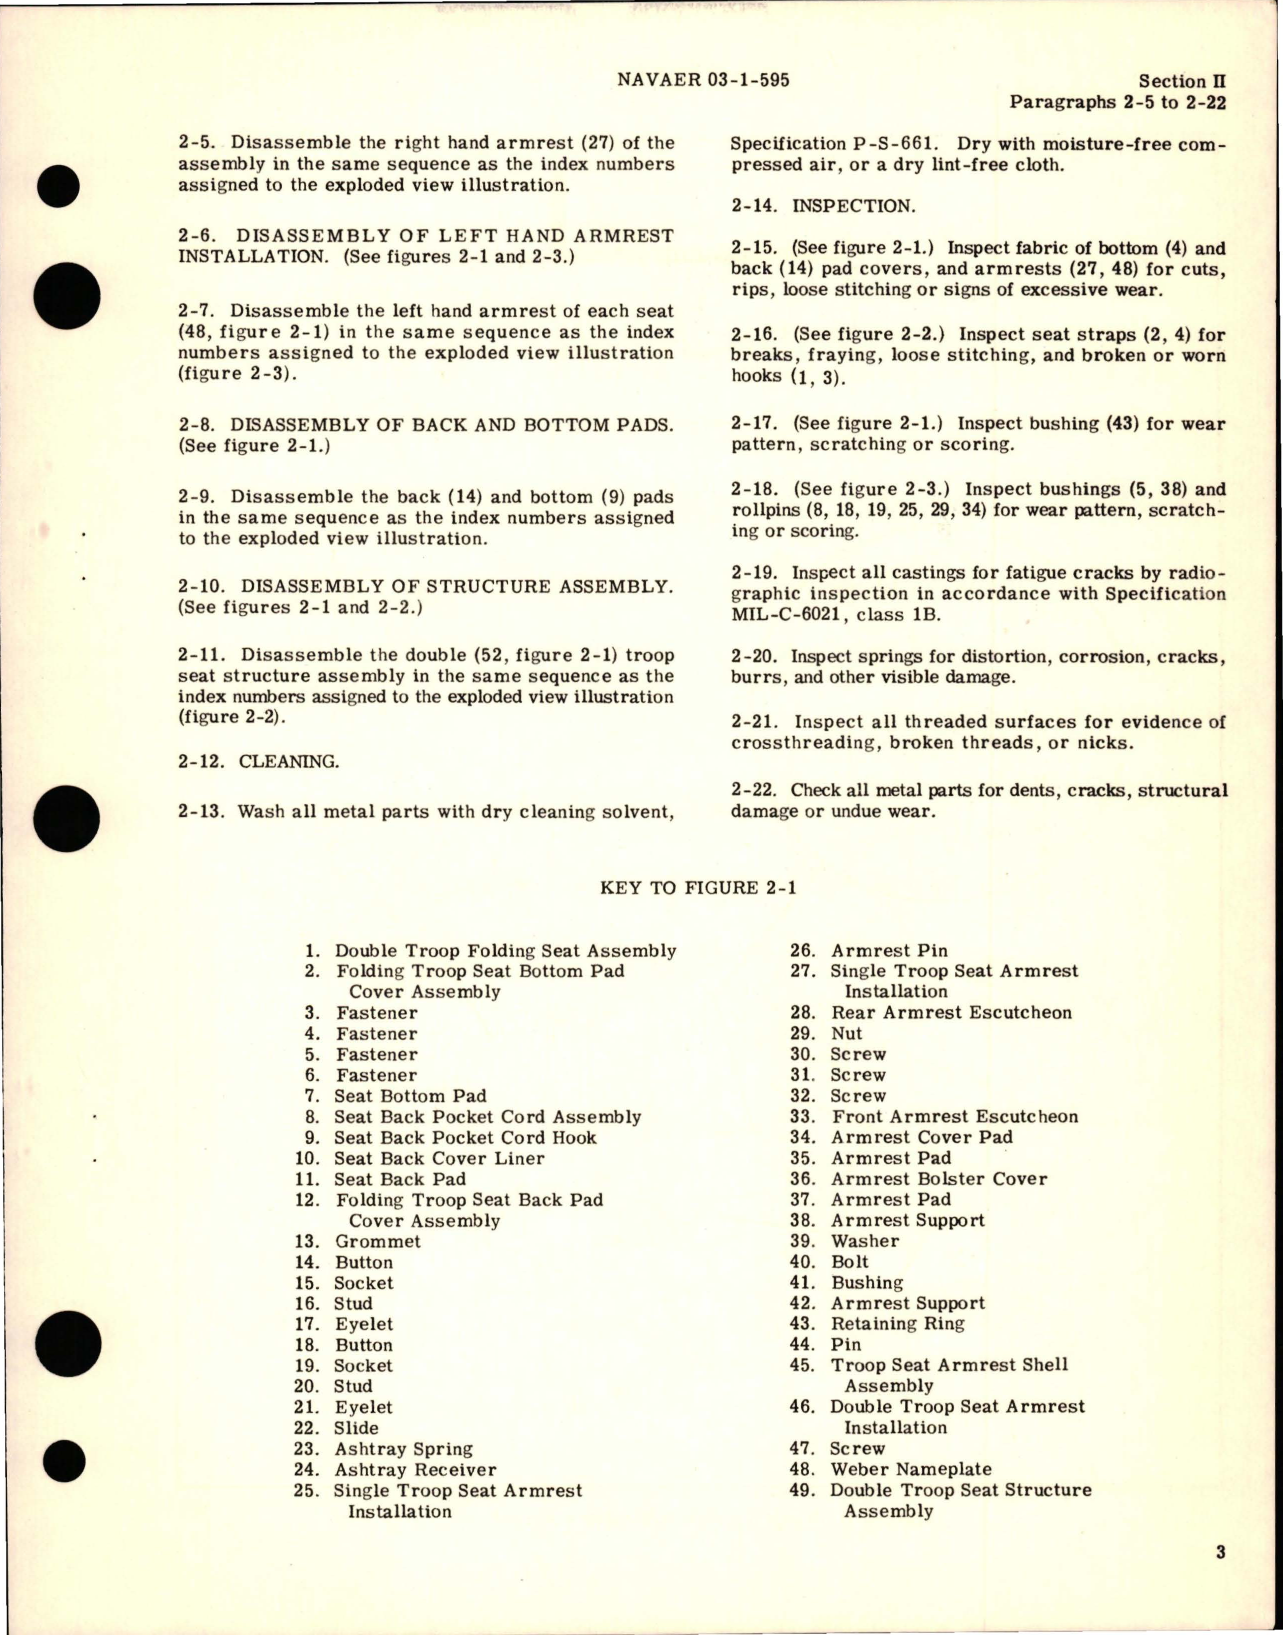 Sample page 5 from AirCorps Library document: Overhaul Instructions for Single, Double, and Triple Folding Troop Seat Assemblies - Parts 74001, 74002, 74003 